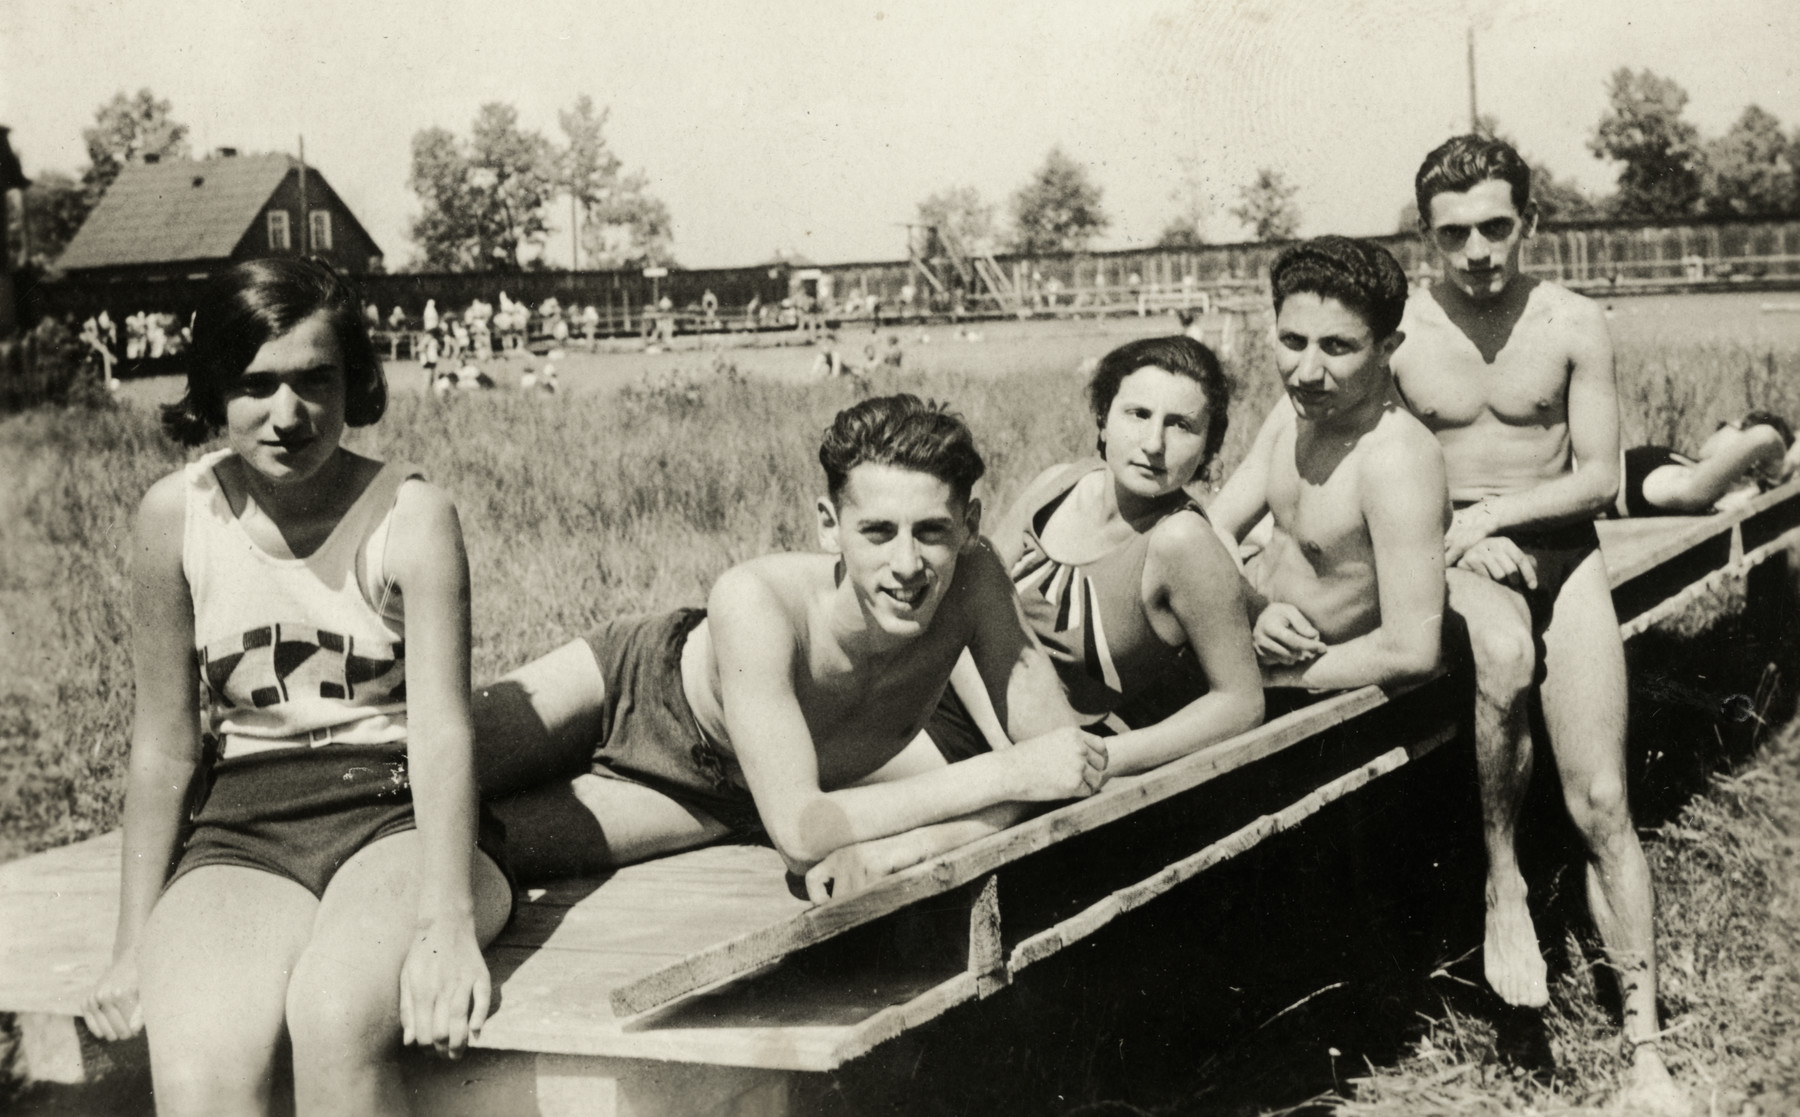 Jewish teenagers relax outside.

Among those pictured are Emil Goldberg and Elze Steuer. Berta Mandelbaum is on the left.